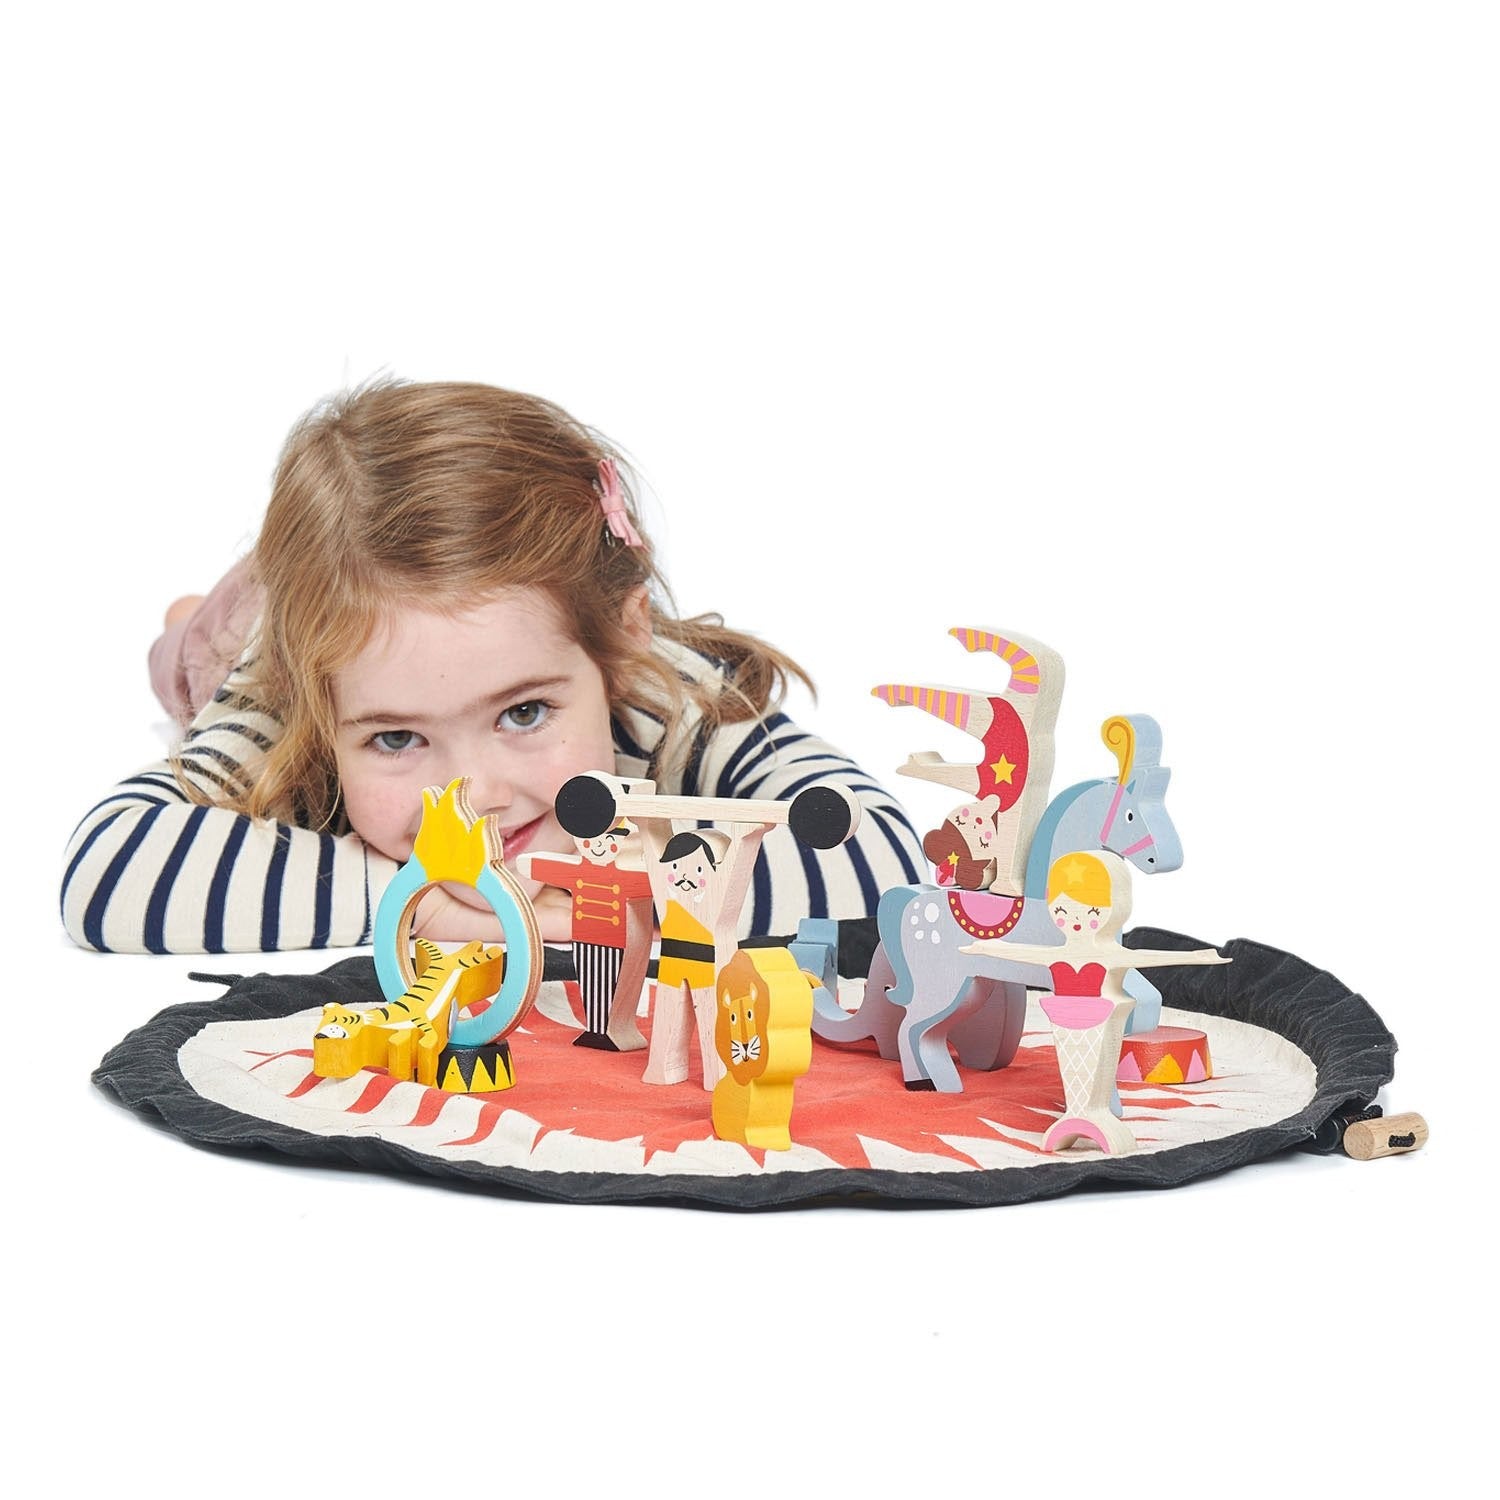 Tender Leaf Toys Circus Stacker